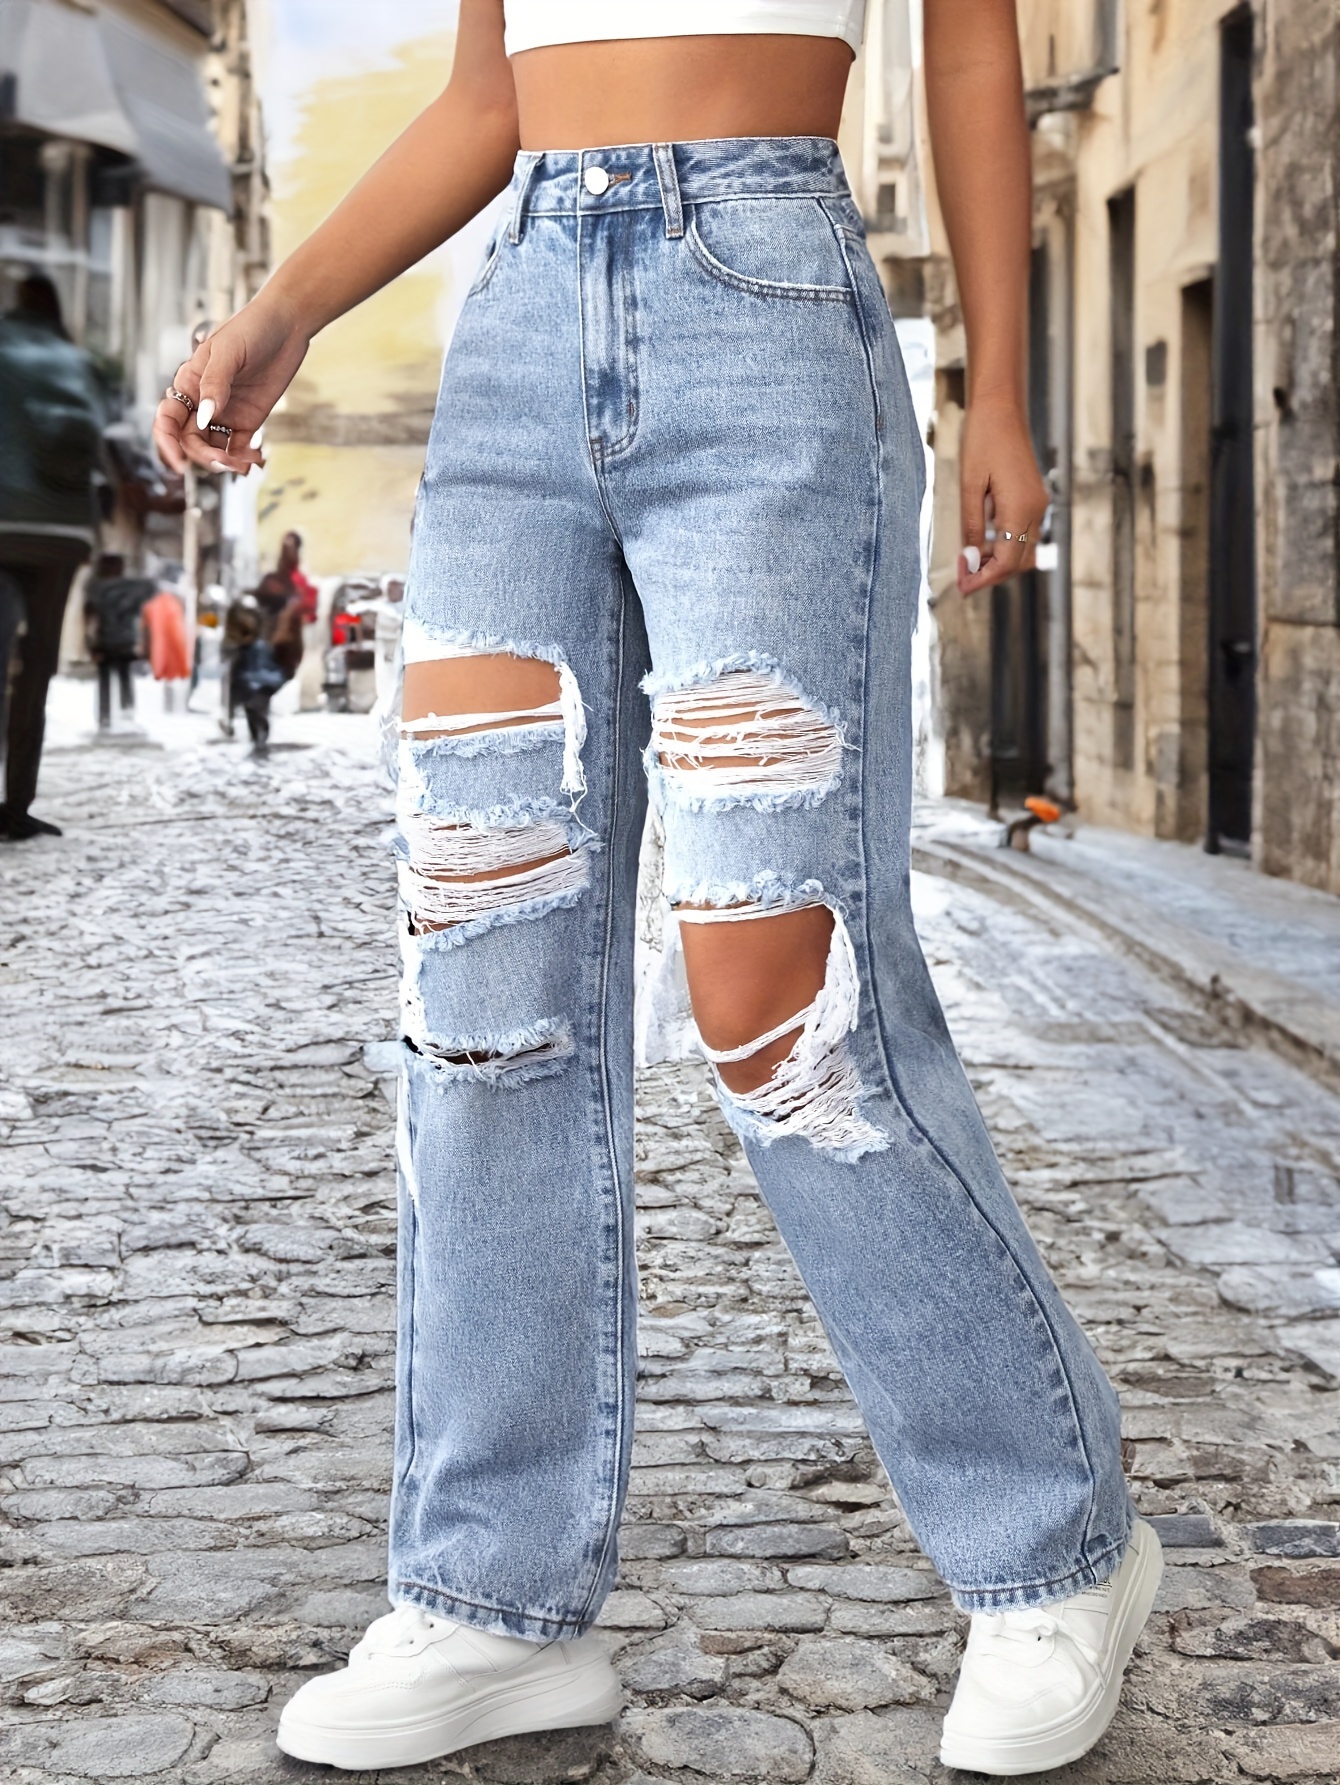 Entyinea Flare Jeans For Women,Casual High Waist Ripped Bell